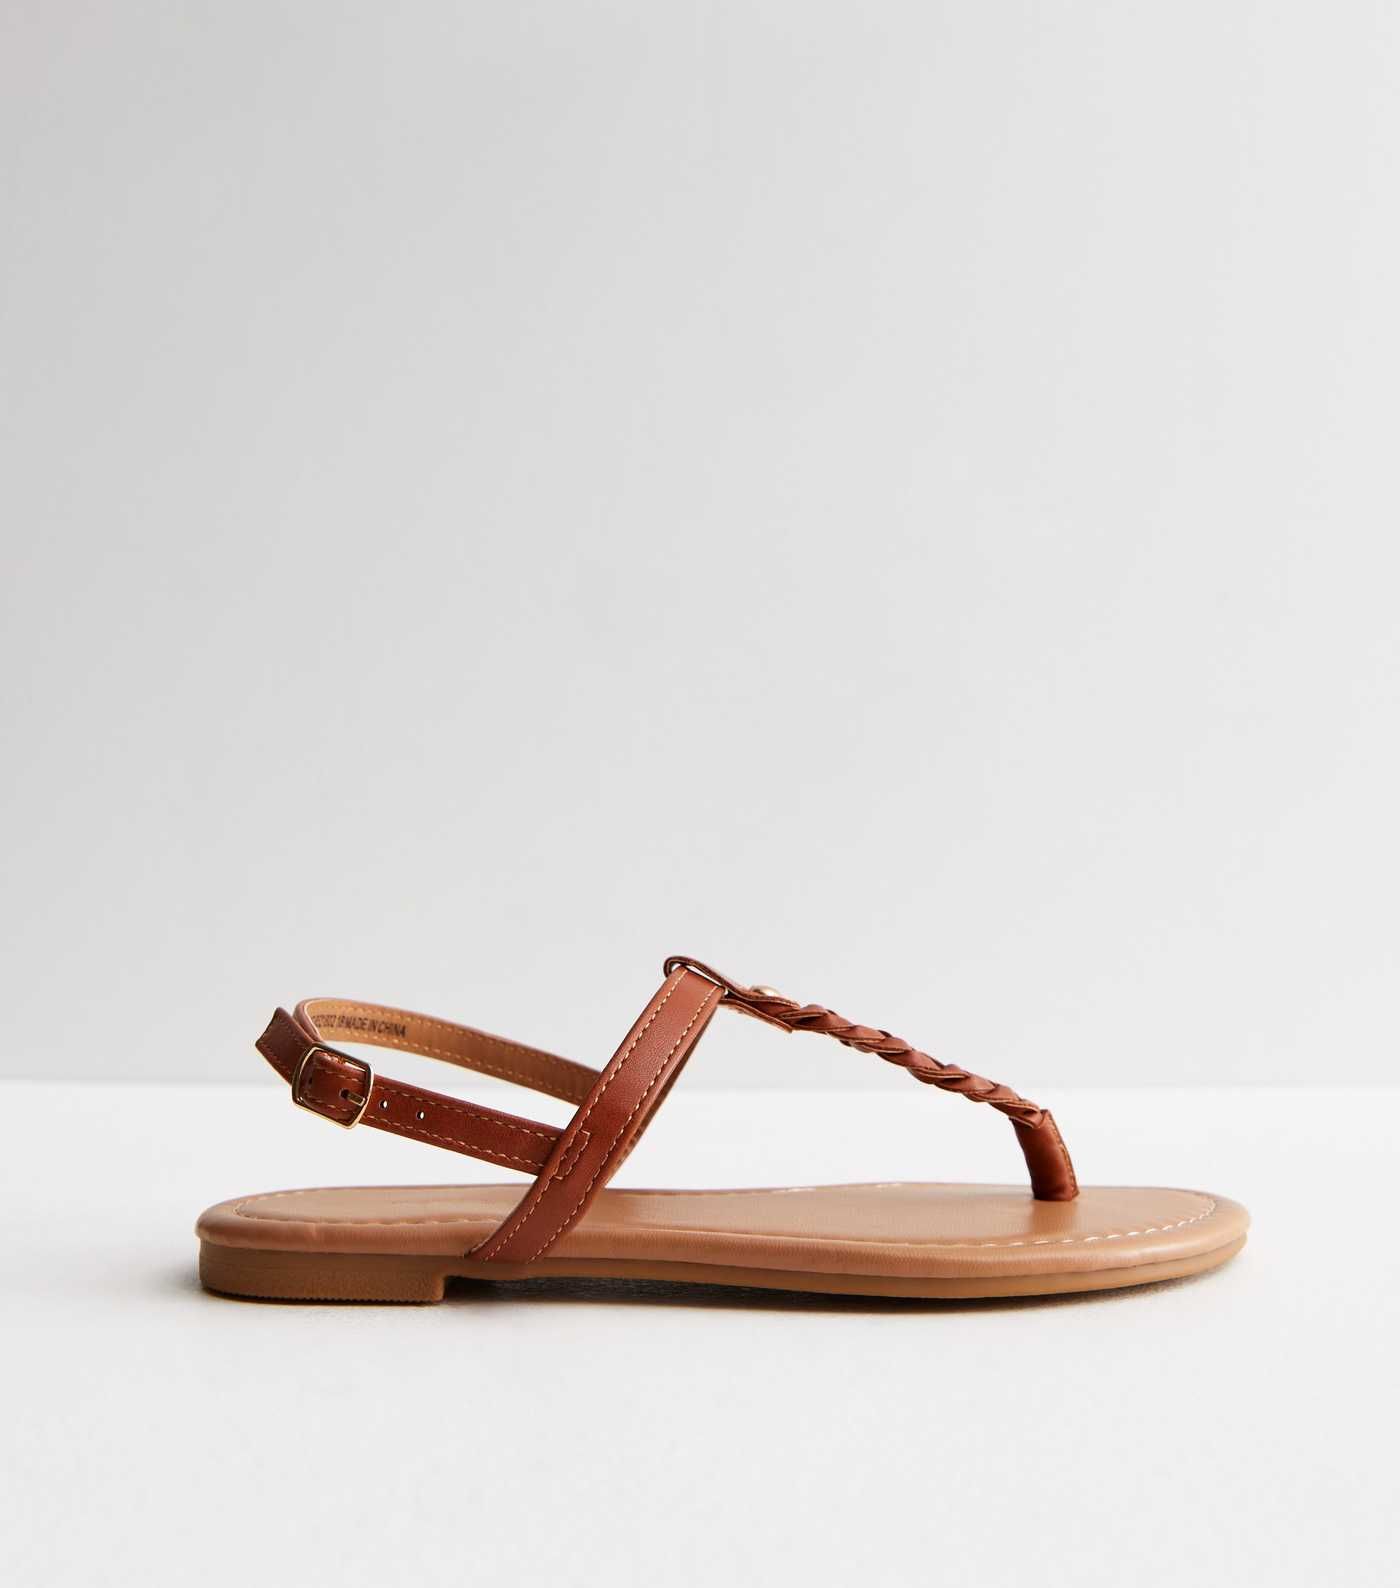 Tan Leather-Look Plaited Toe Post Sandals
						
						Add to Saved Items
						Remove from Saved... | New Look (UK)